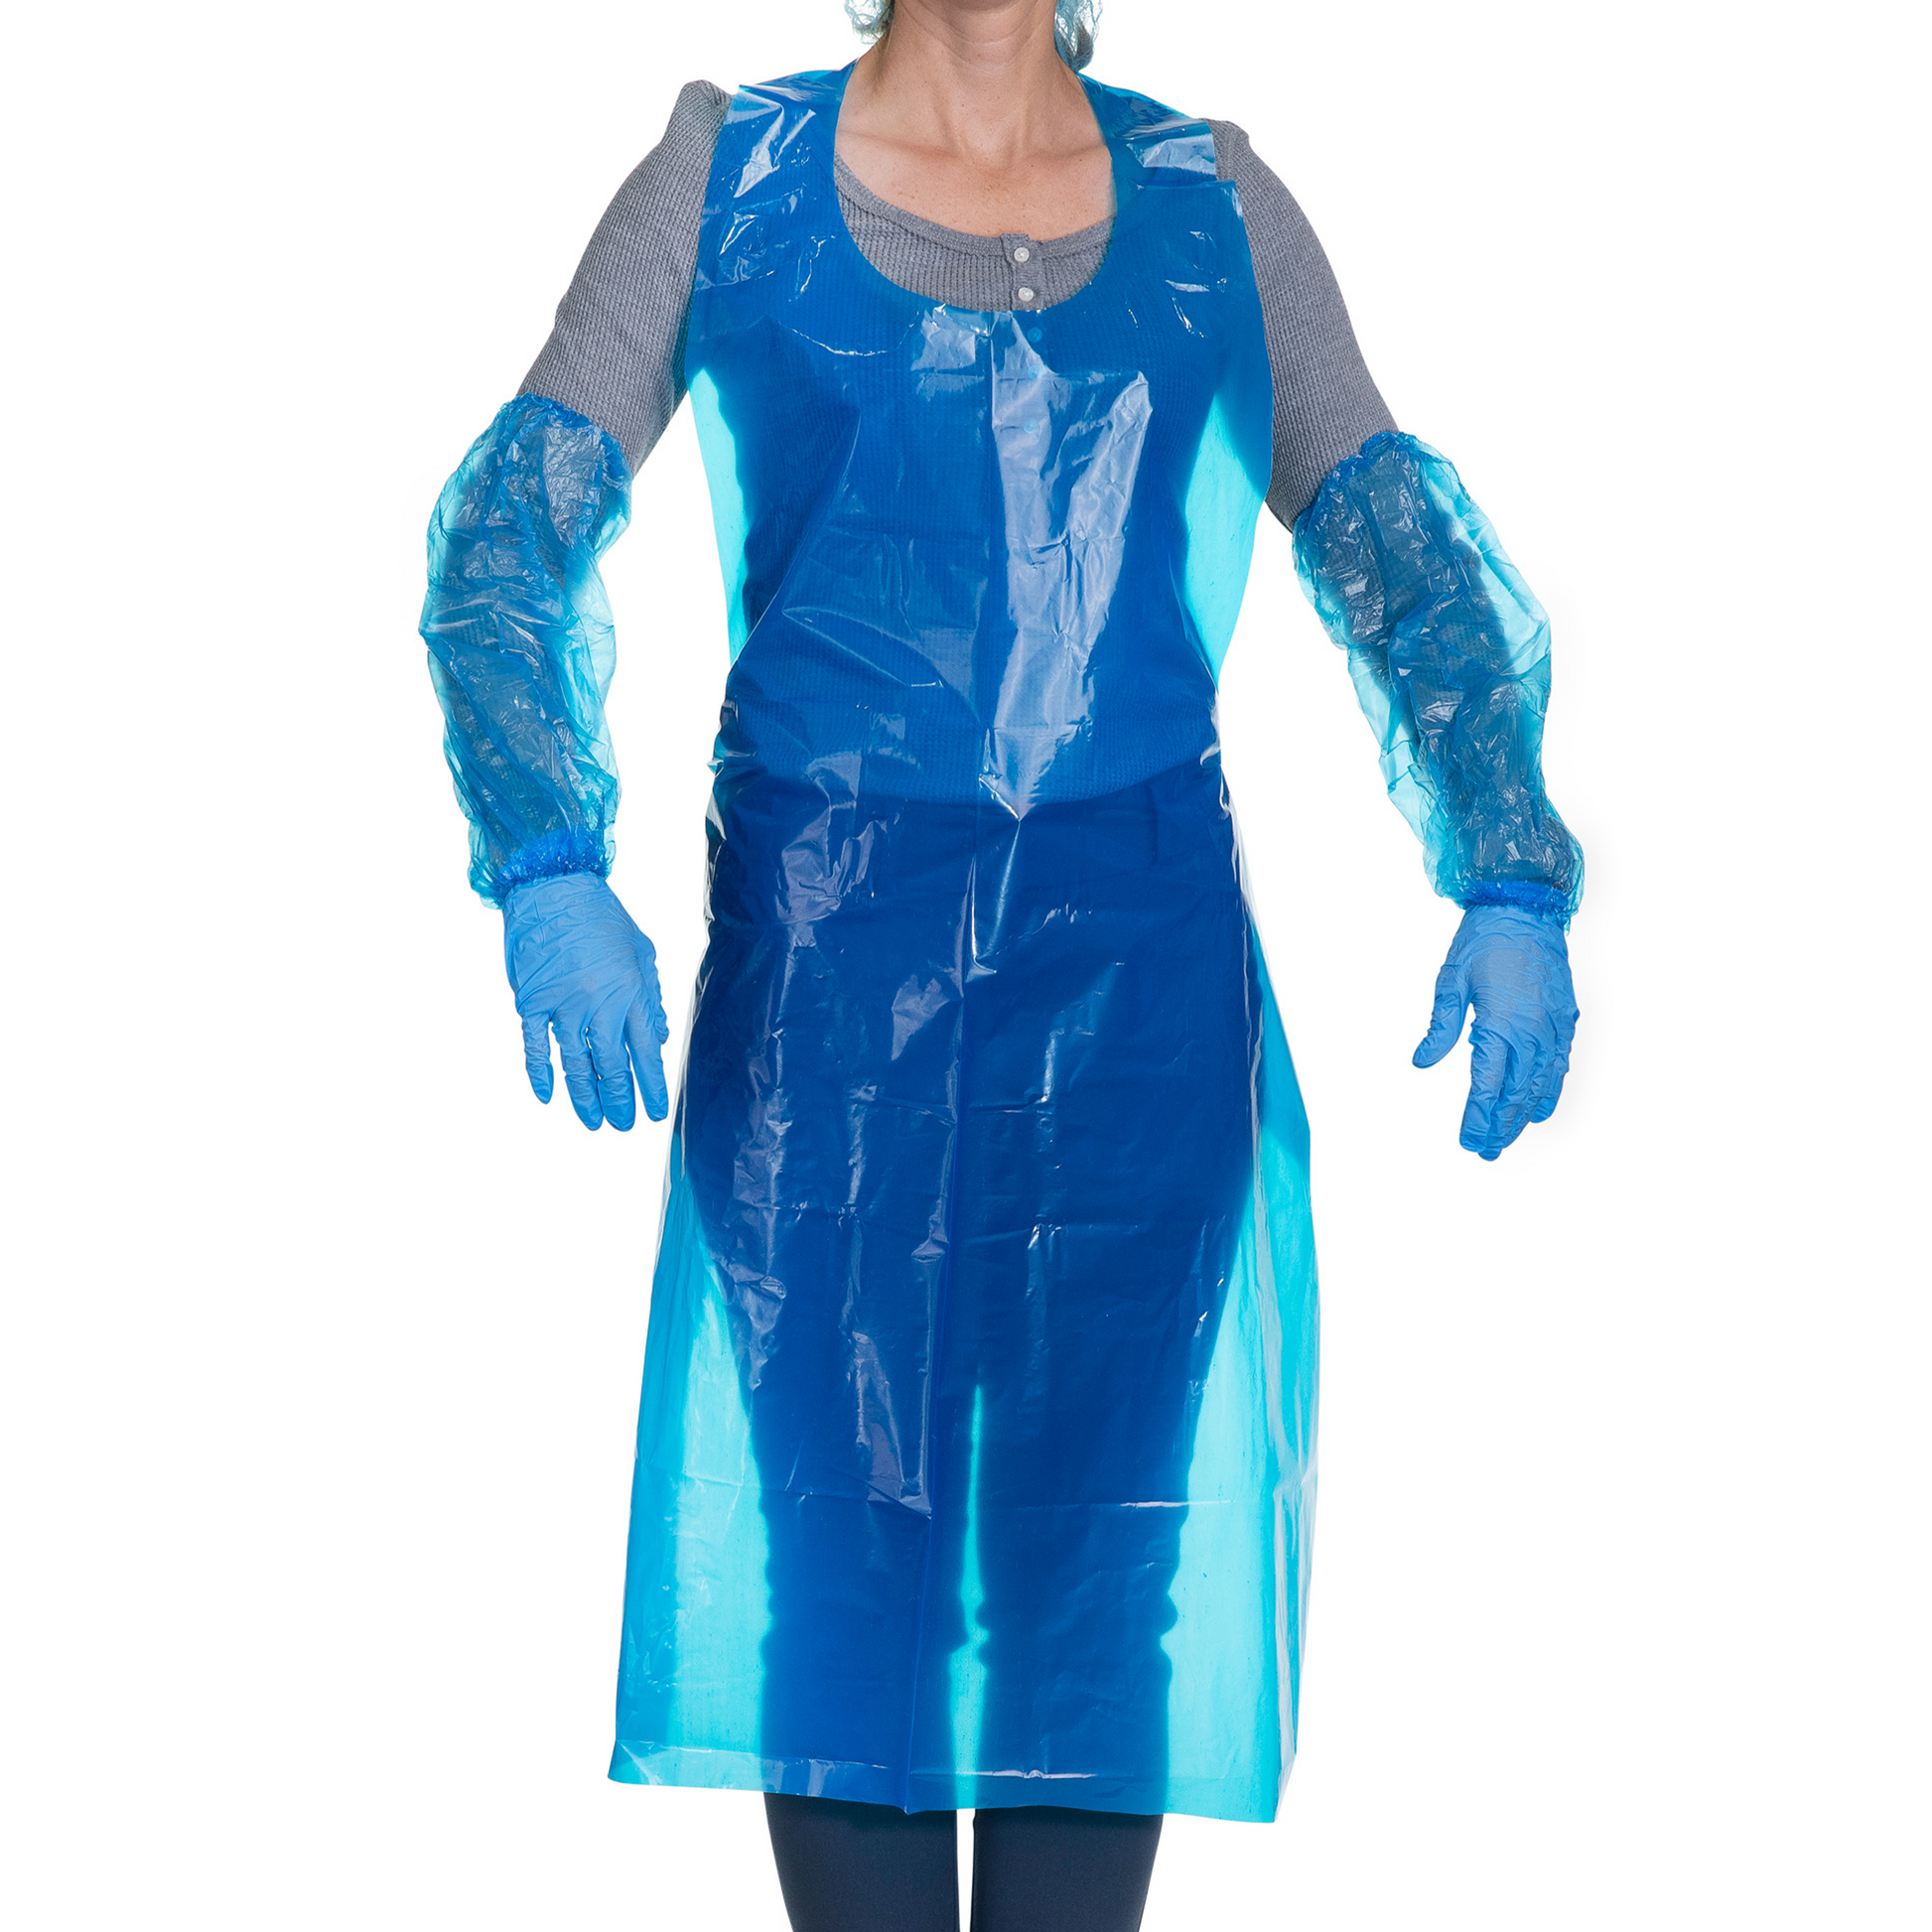 Top-Quality Disposable Polythene Aprons (100 Pack) - Special Offer